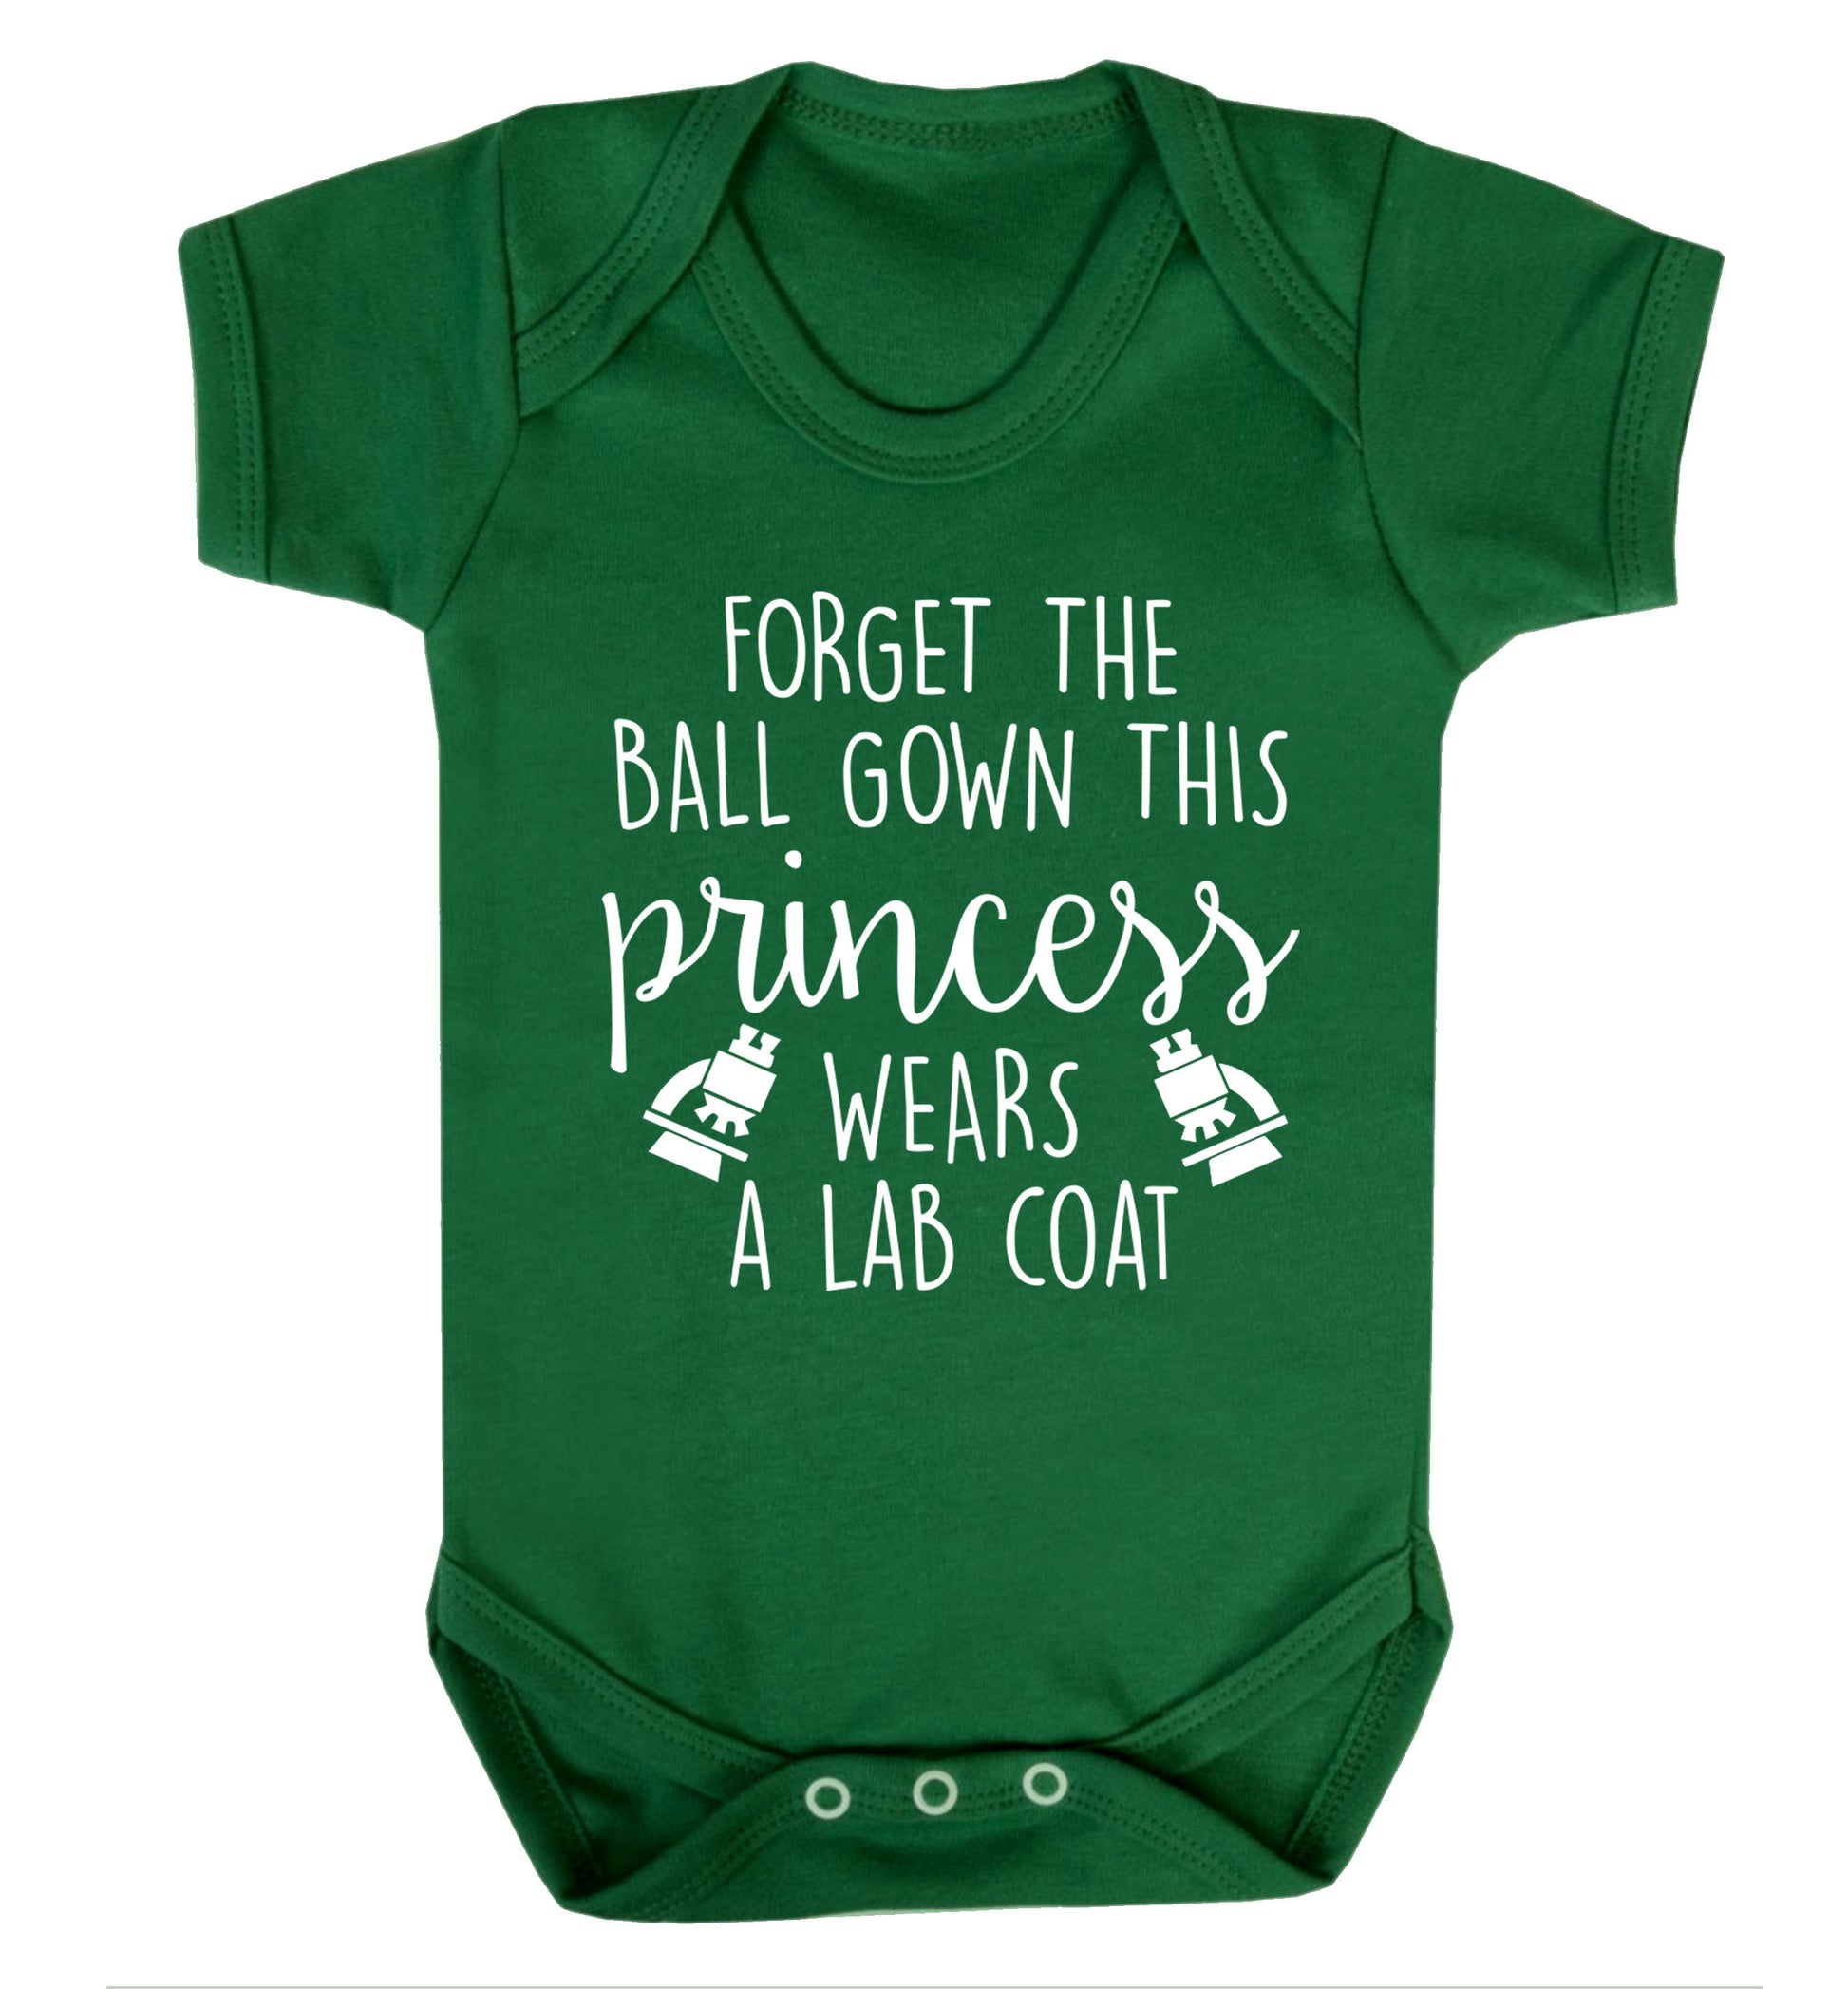 Forget the ball gown this princess wears a lab coat Baby Vest green 18-24 months